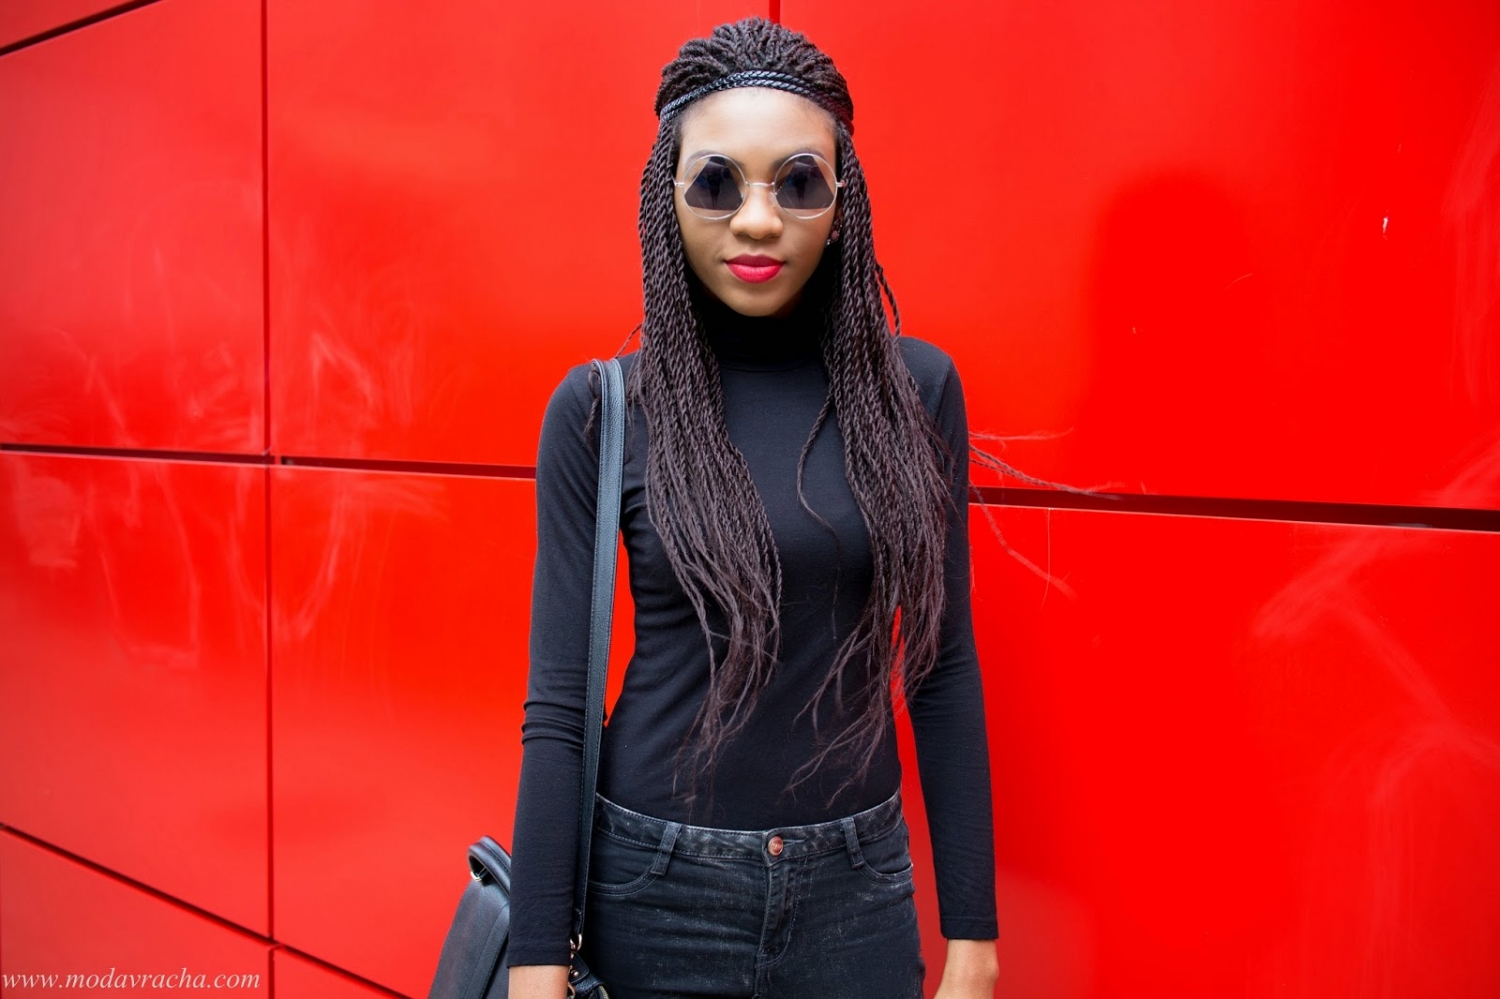 Fashion blogger all black outfit